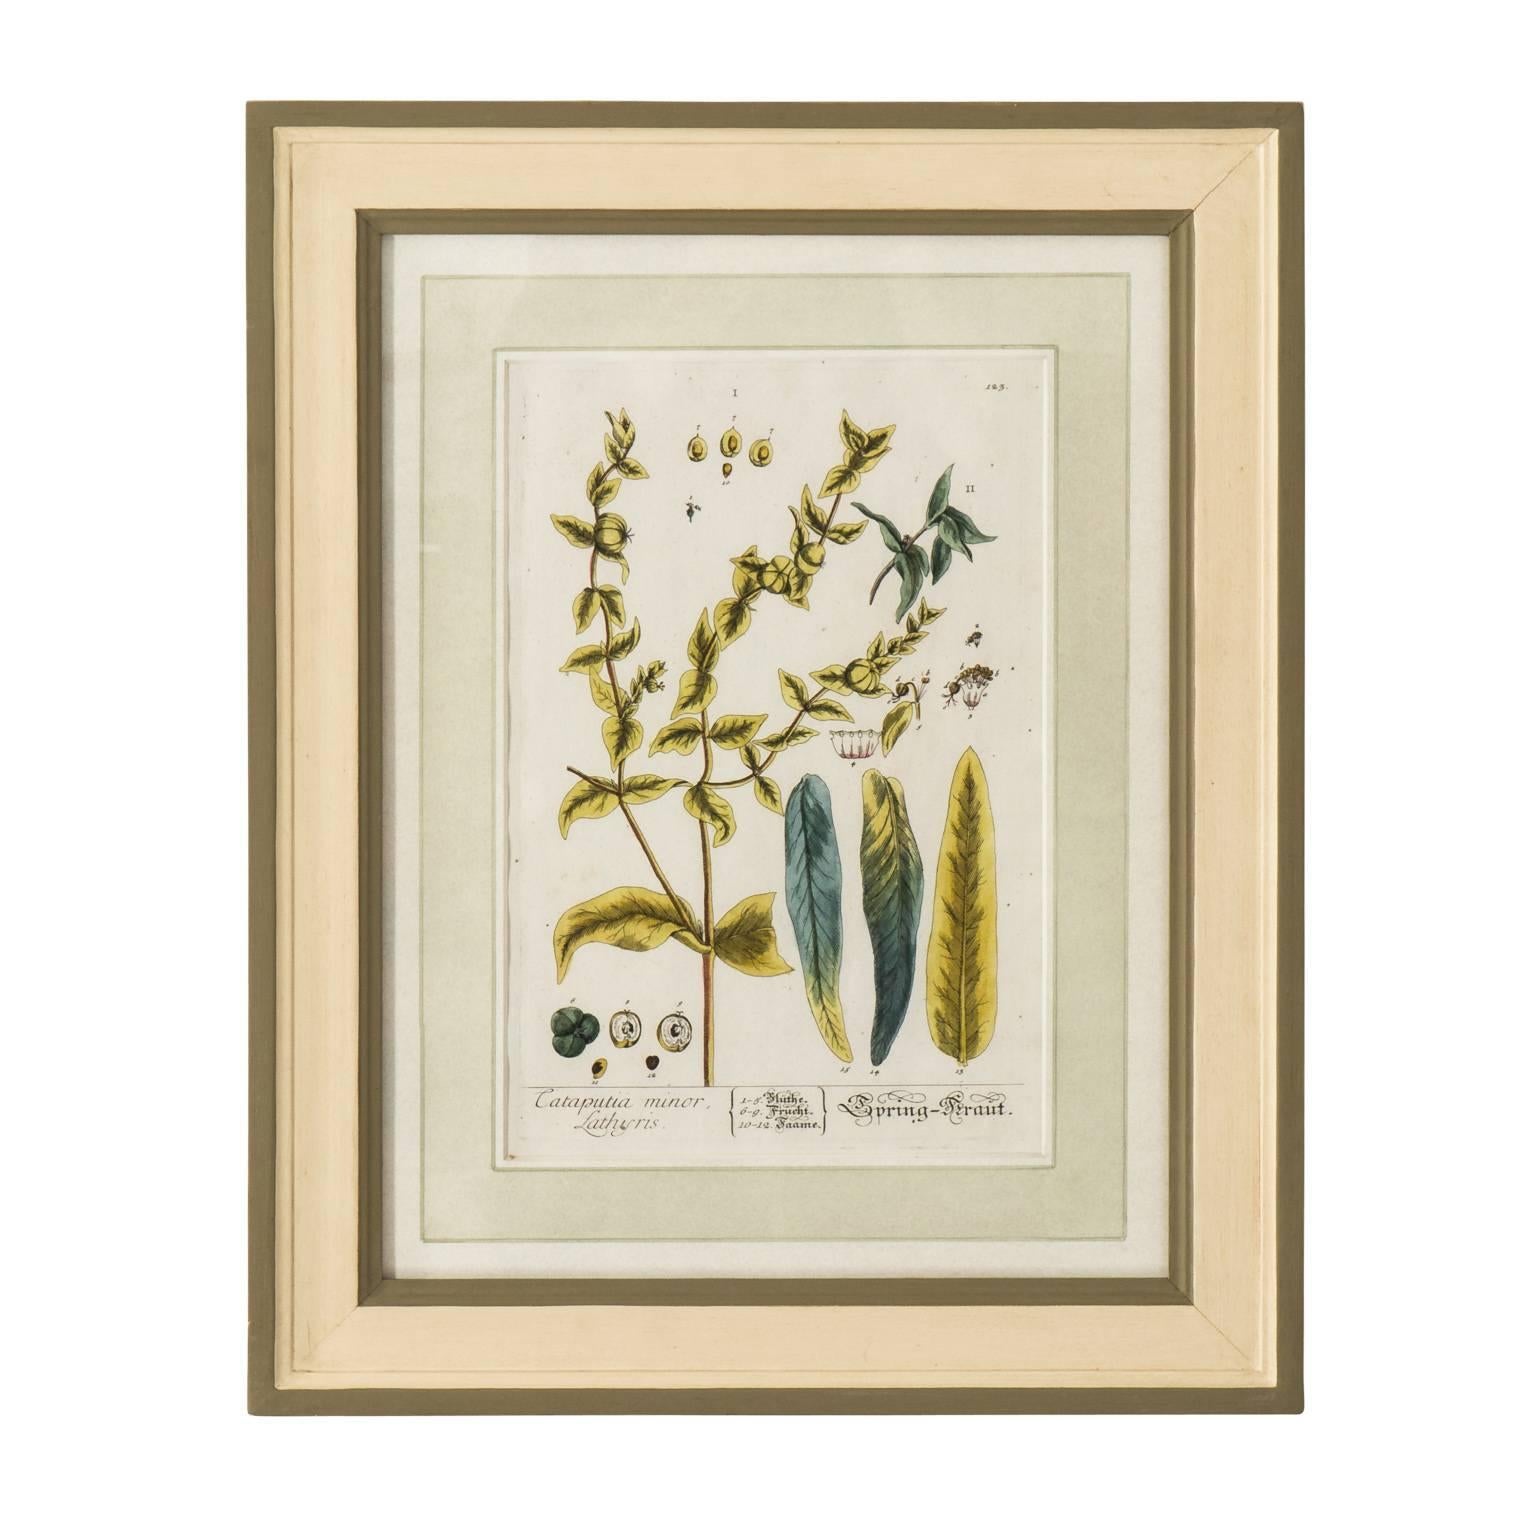 Set of Six Copper Plate Engravings of Herbs by N.F. Eisenberger Nuremberg In Good Condition For Sale In Stamford, CT